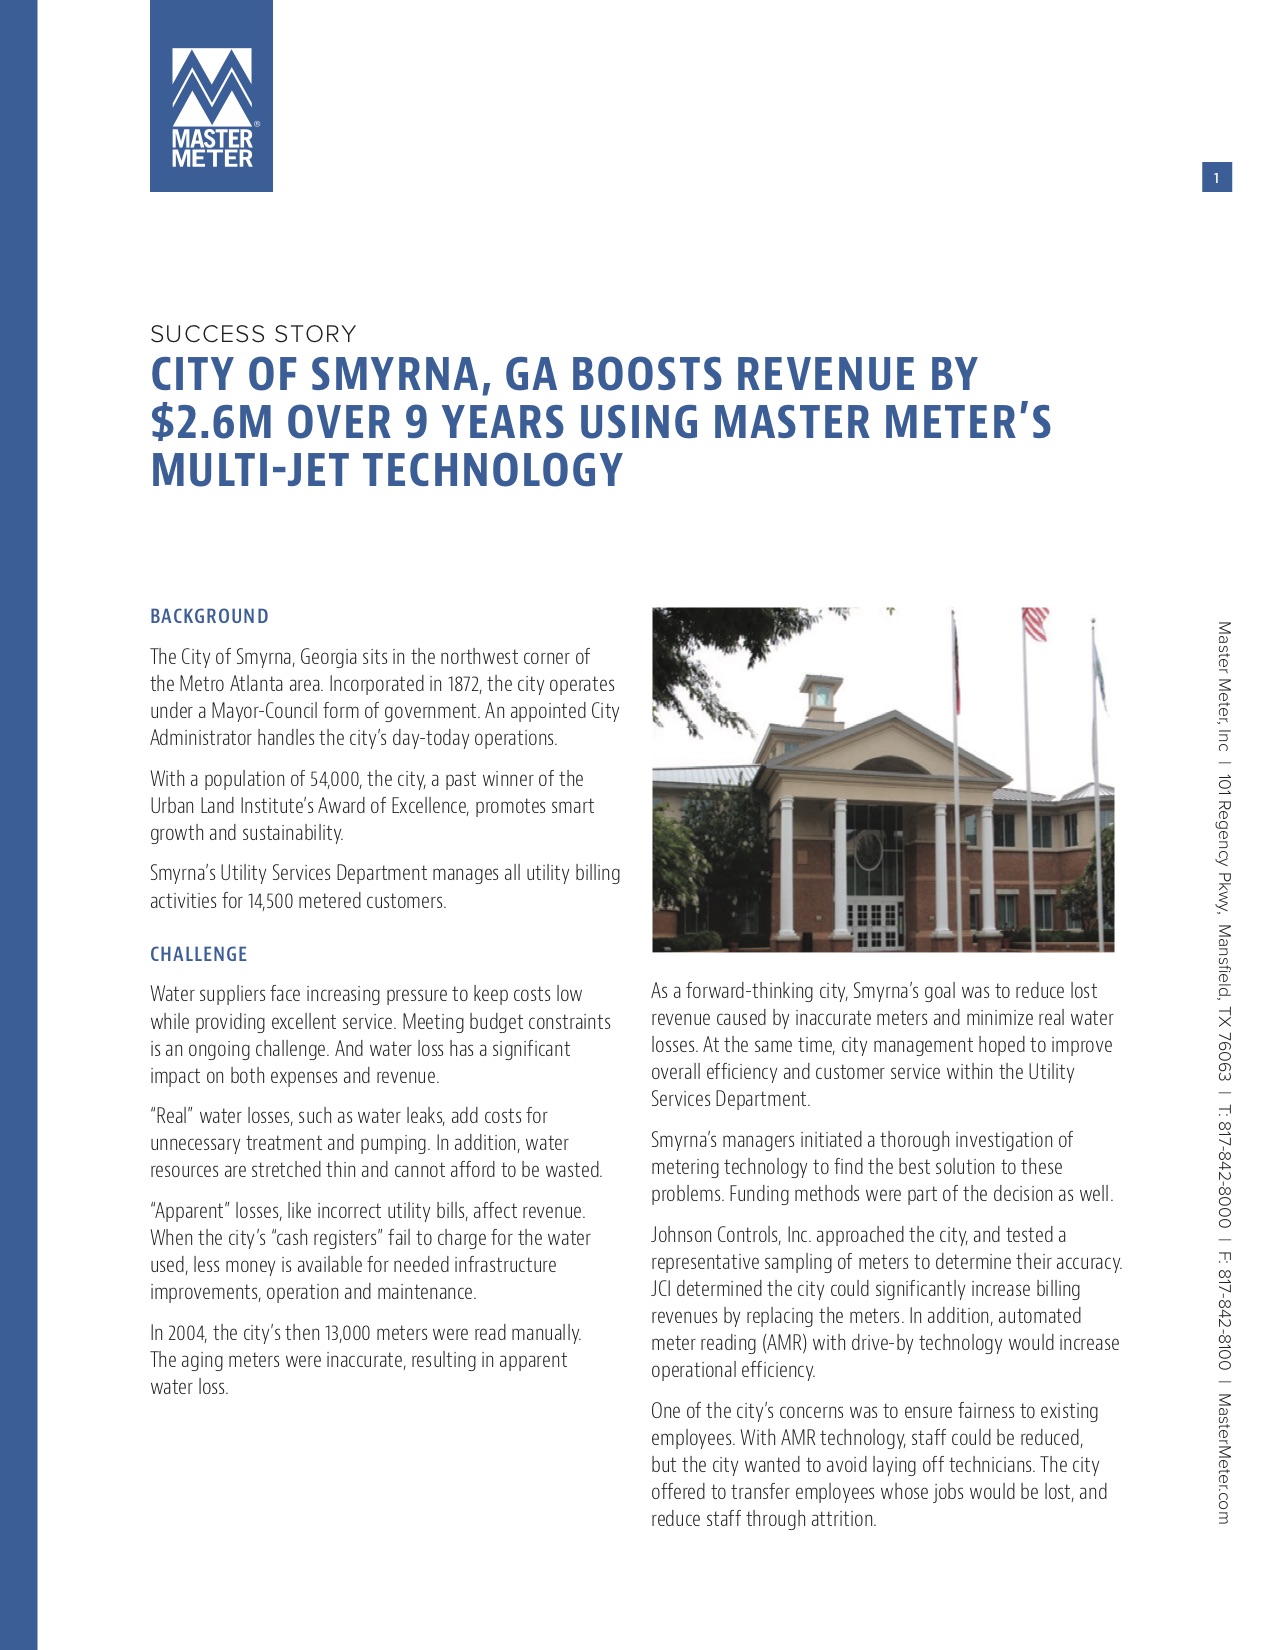 City of Smyrna, GA Boosts Revenue by $2.6M Over 9 Years Using Master Meter's Multi-Jet Technology